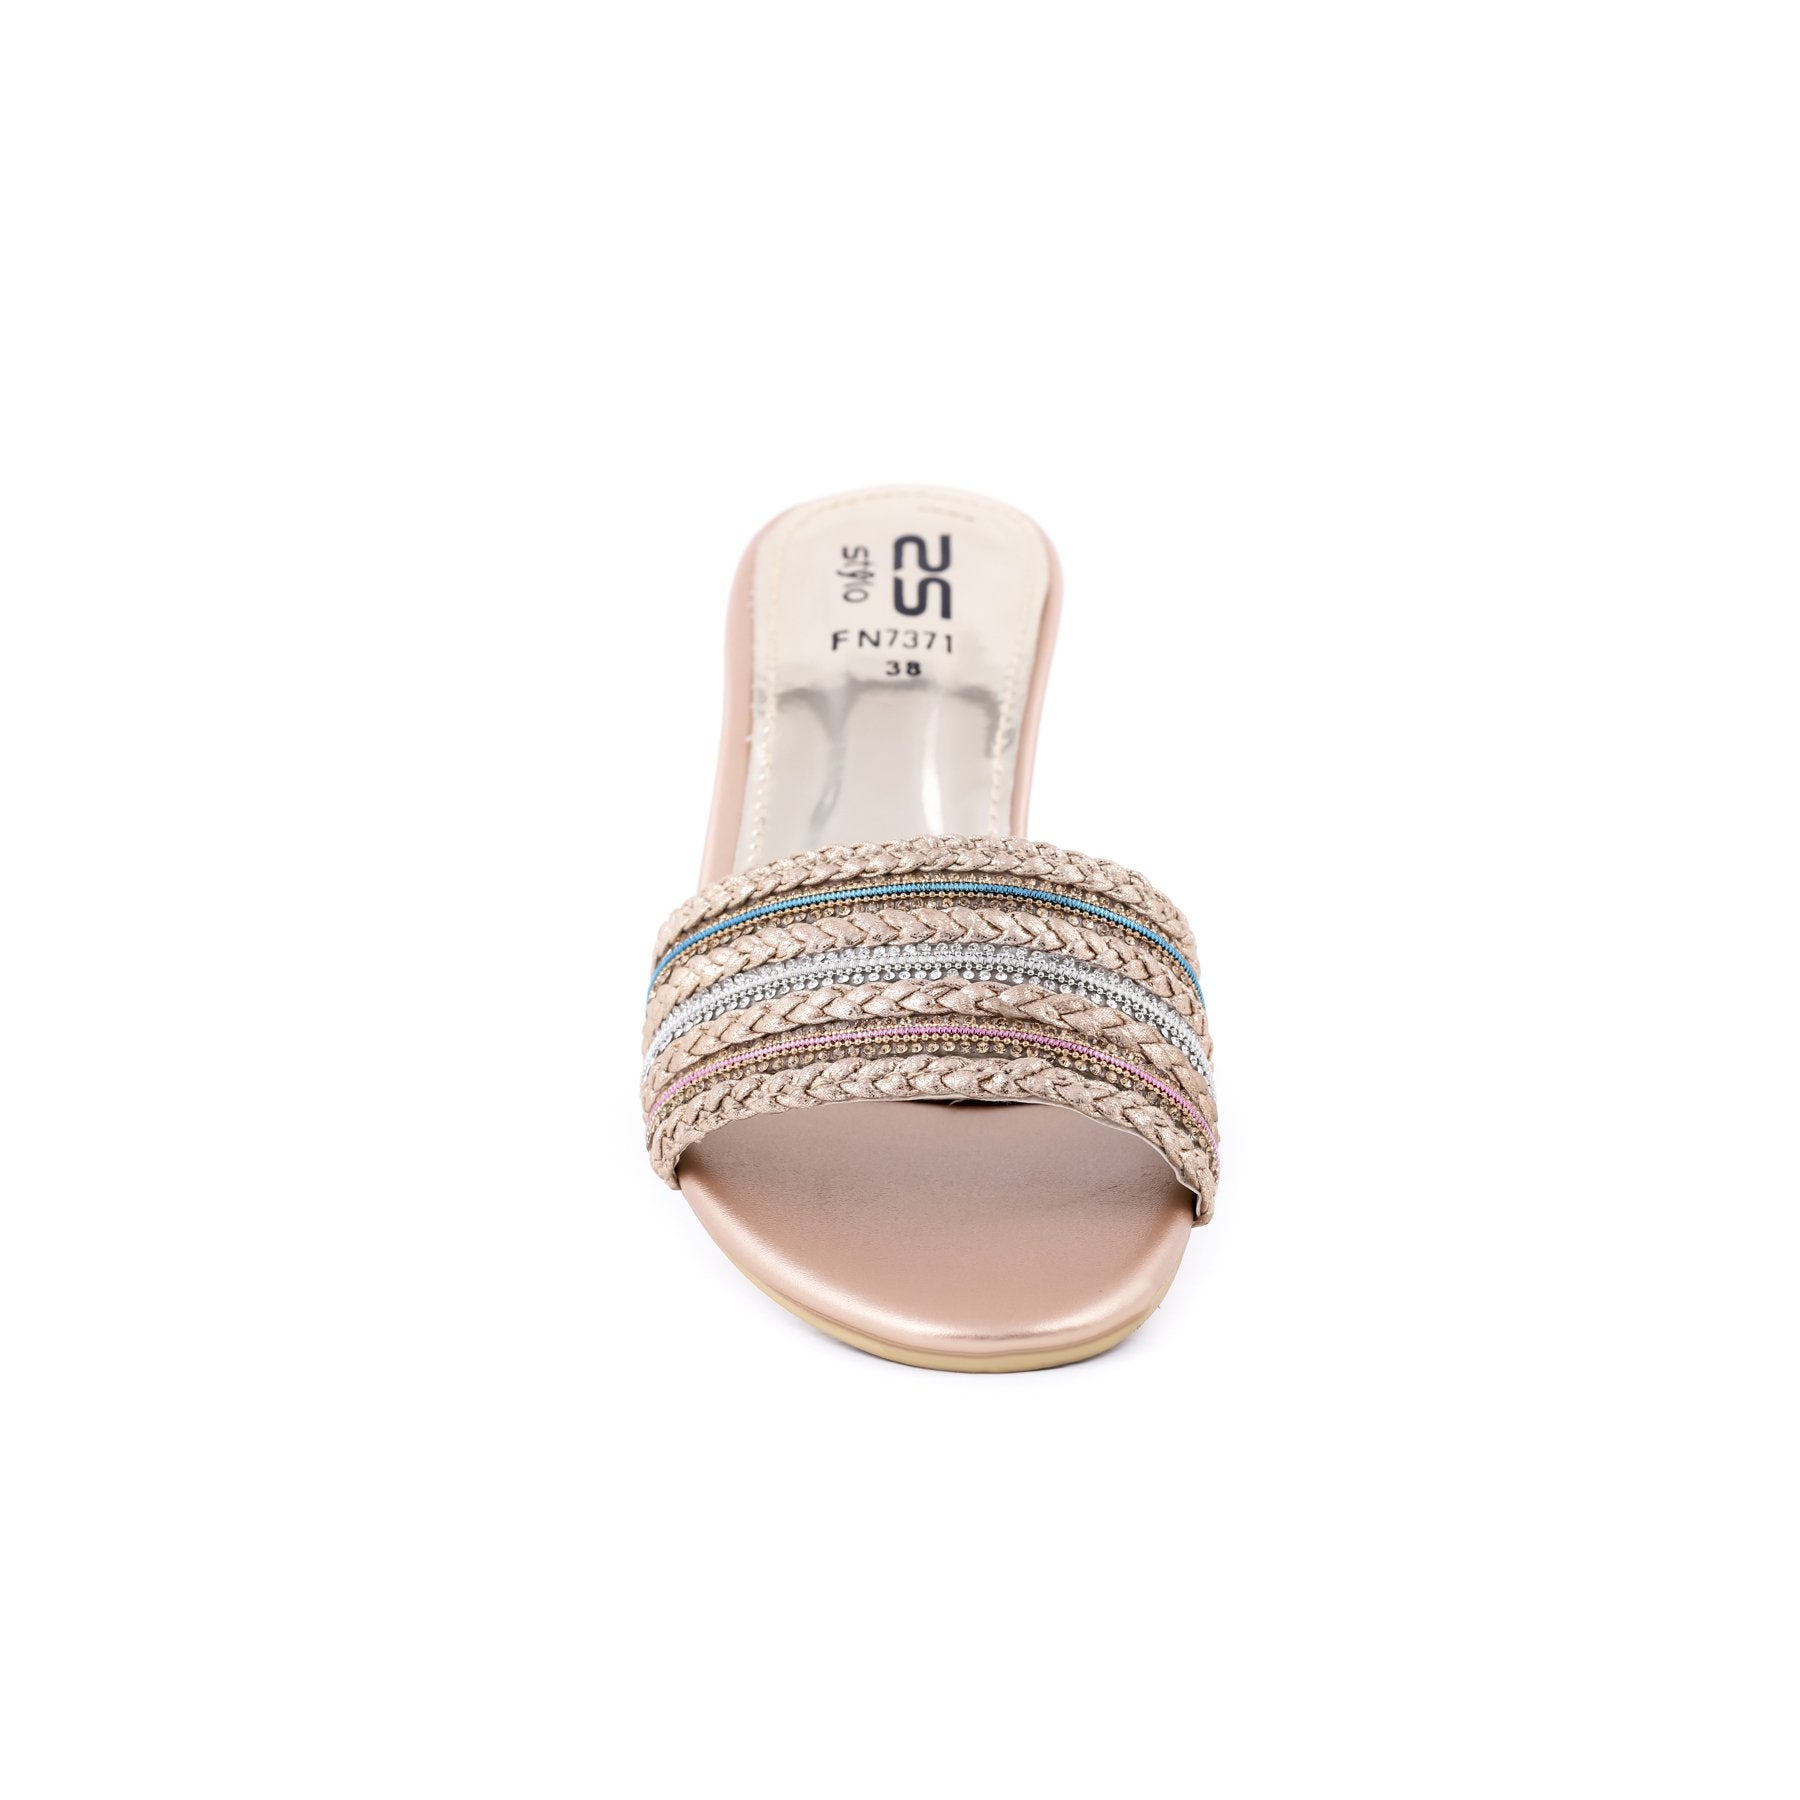 Peach Color Fancy Slippers FN7371